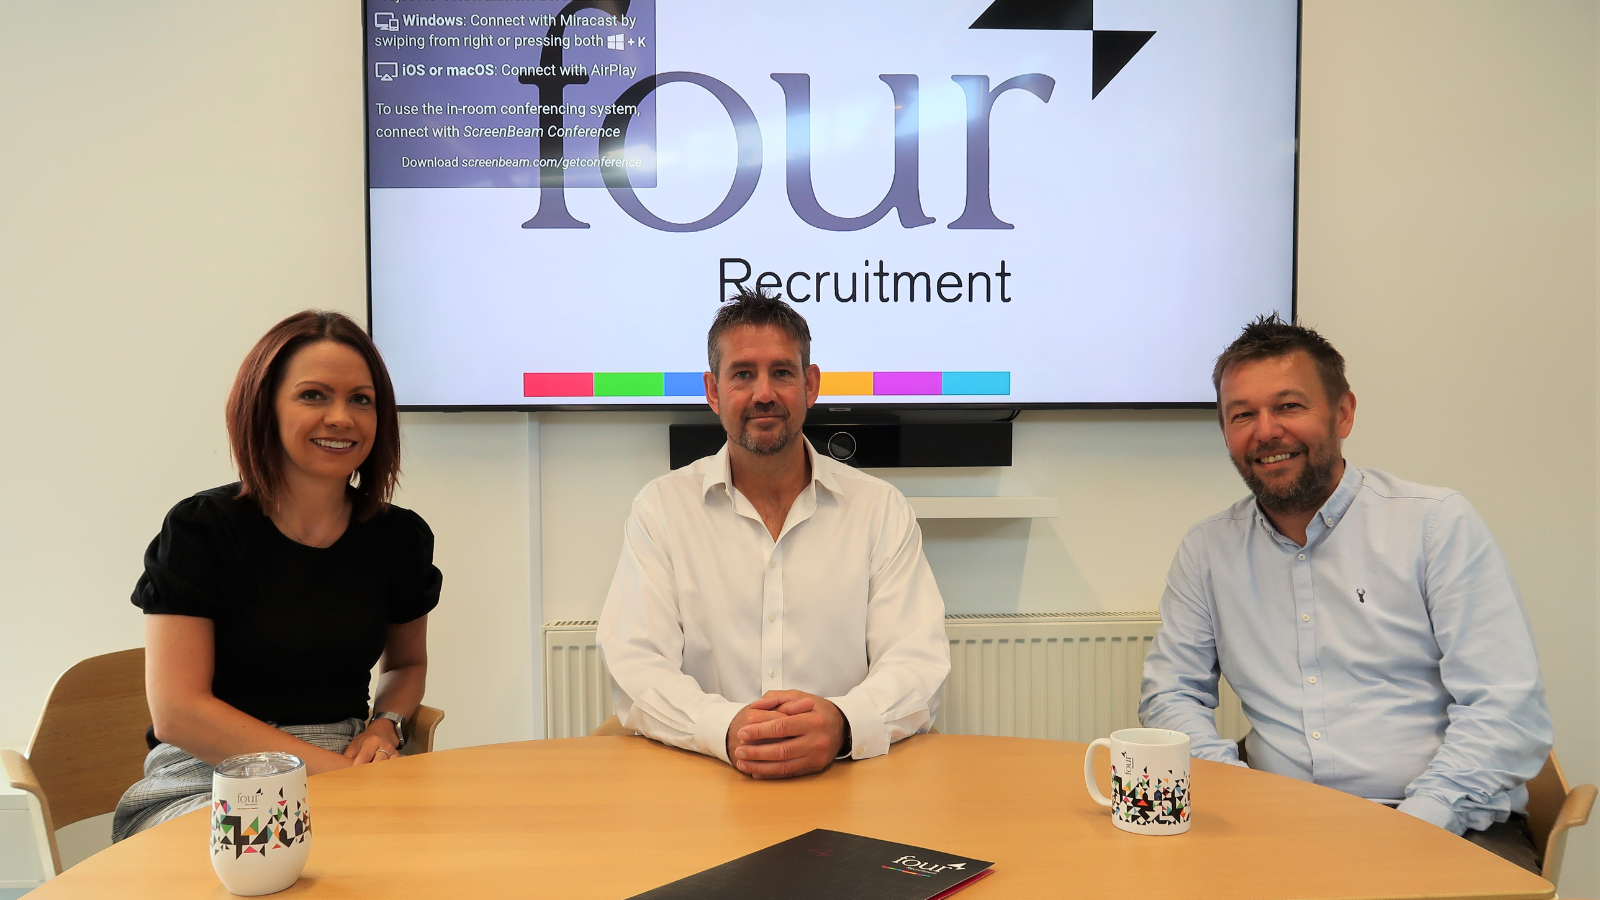 Four Recruitment Appoints Craig Stevenson as Chief Revenue Officer to Drive Growth and Success